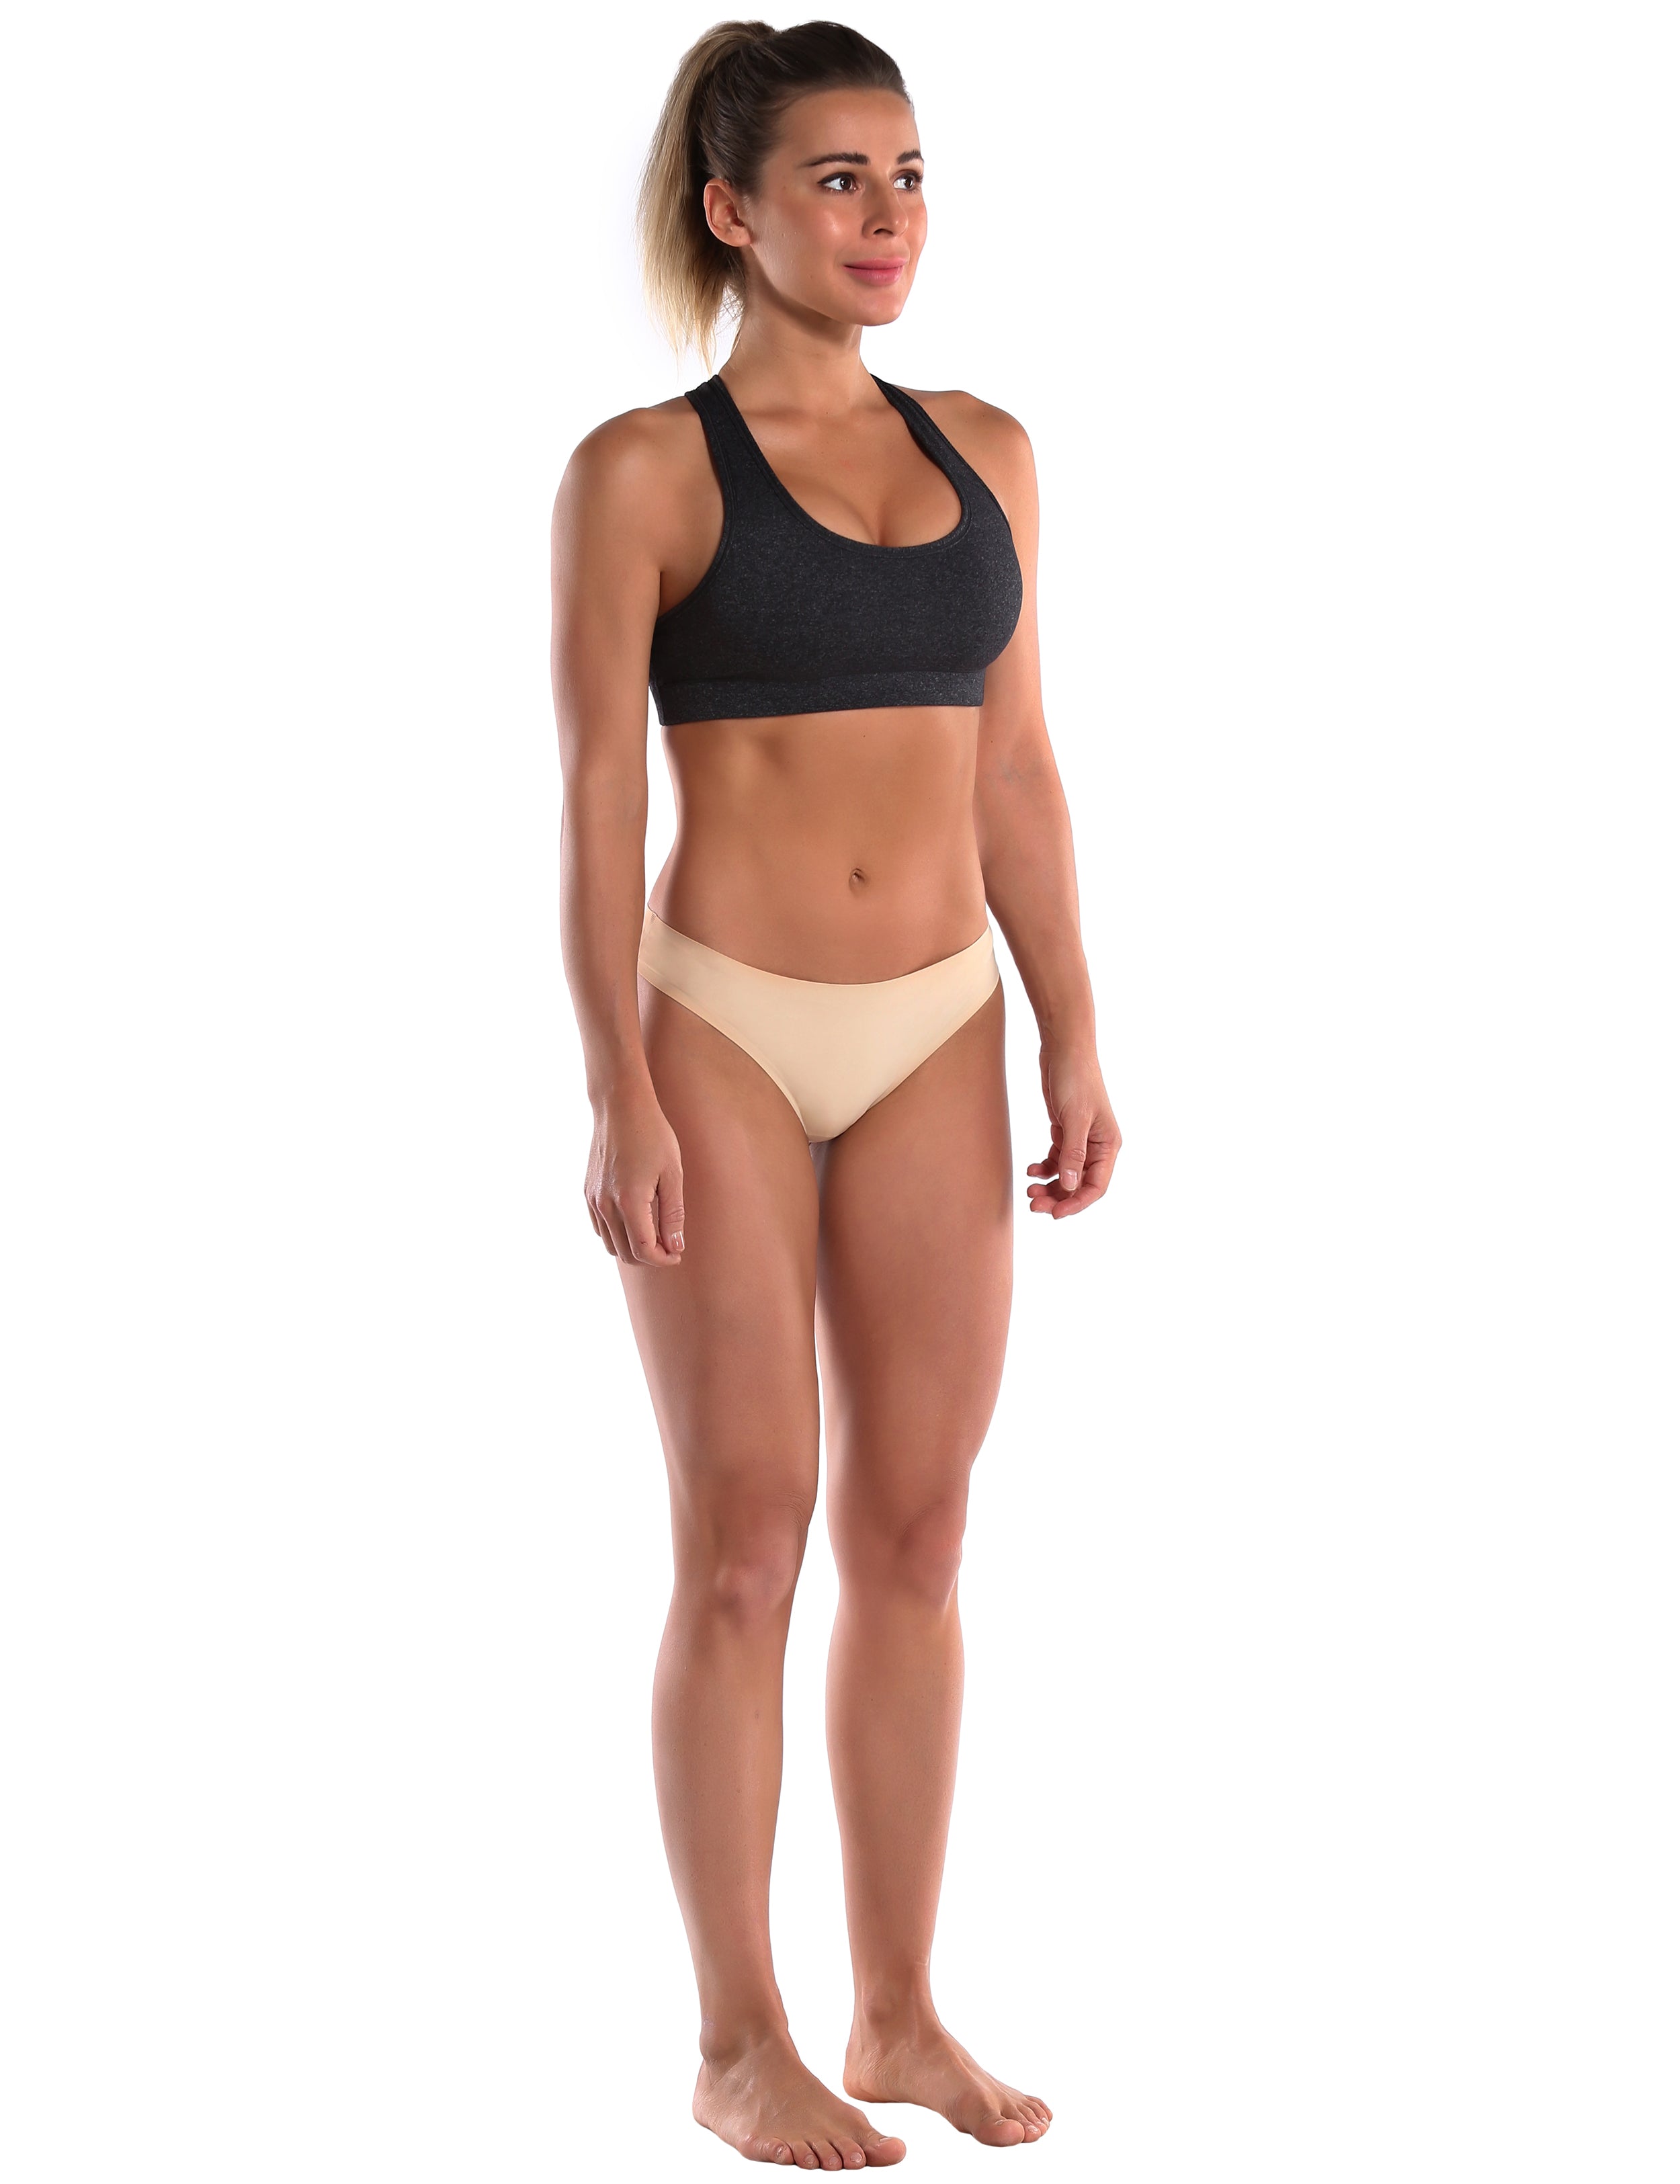 Invisibles Sport Thongs Skin Sleek, soft, smooth and totally comfortable: our newest thongs style is here. High elasticity High density Softest-ever fabric Laser cutting Unsealed Comfortable No panty lines Machine wash 95% Nylon, 5% Spandex